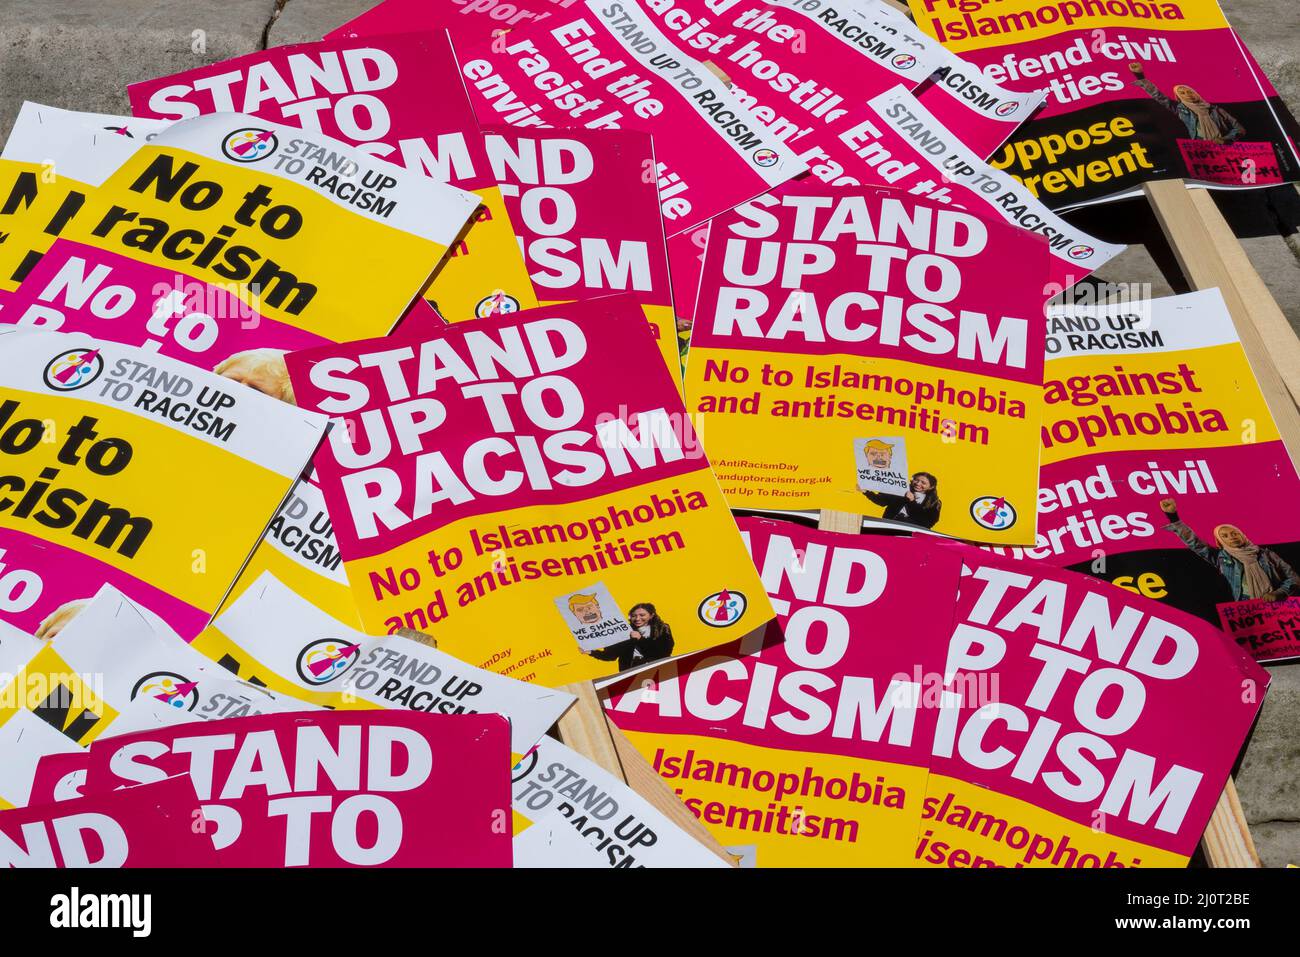 Protest taking place in London on UN Anti Racism Day. Stand up to racism placards ready for the rally Stock Photo